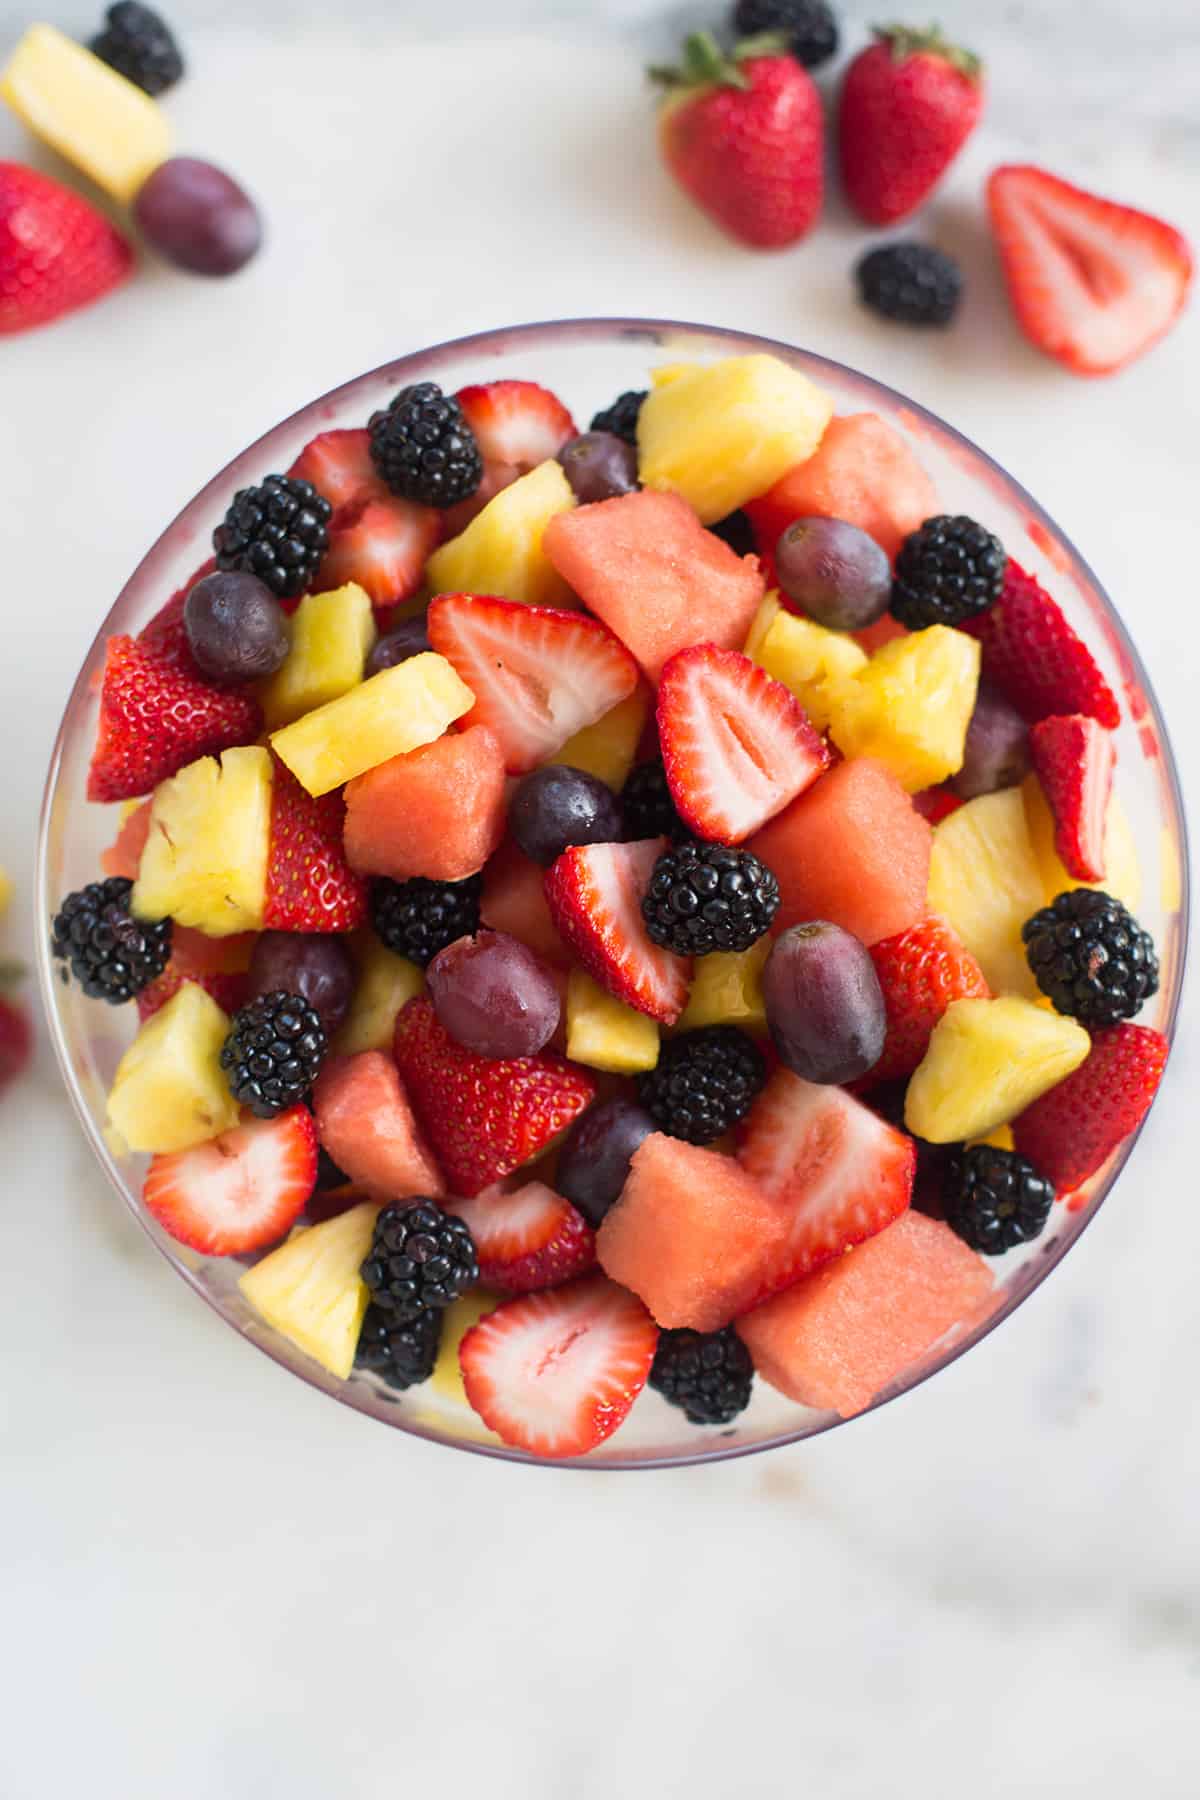 A bowl of sliced fruit for a fruit salad, including: strawberries, watermelon, pineapple, grapes, and blackberries.